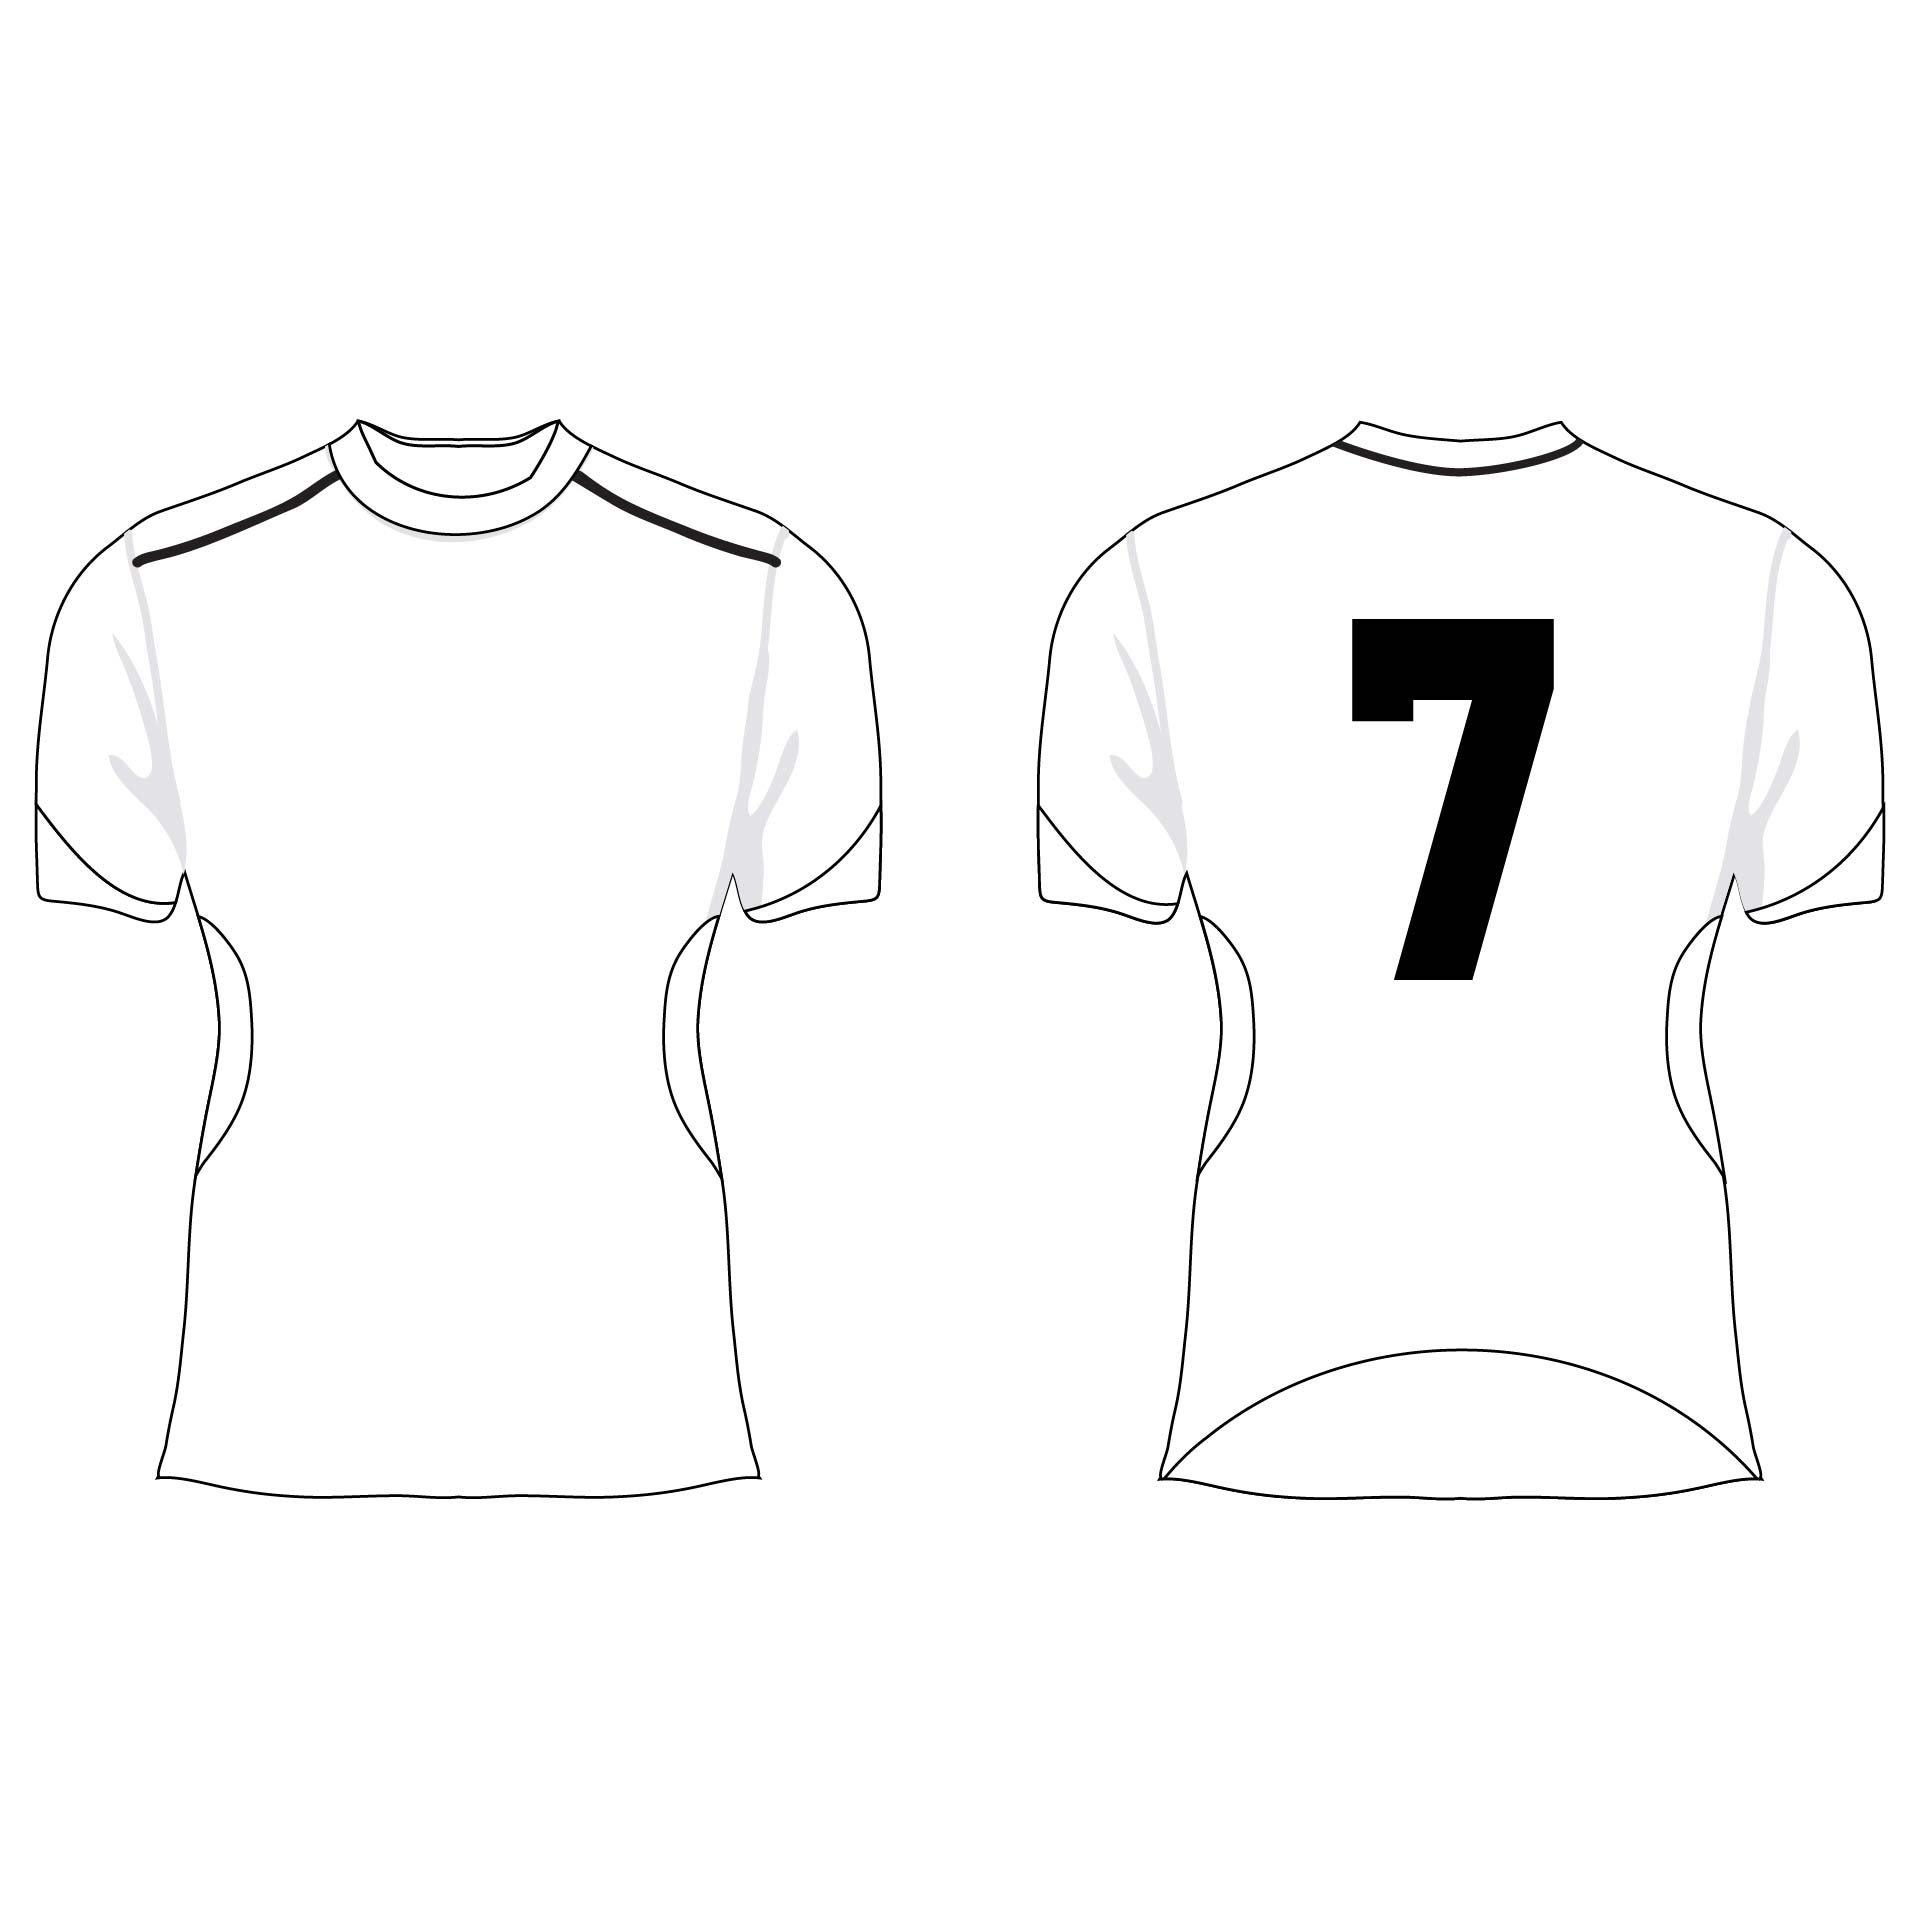 8 Best Images of Football Jersey Template Printable Stencils Football